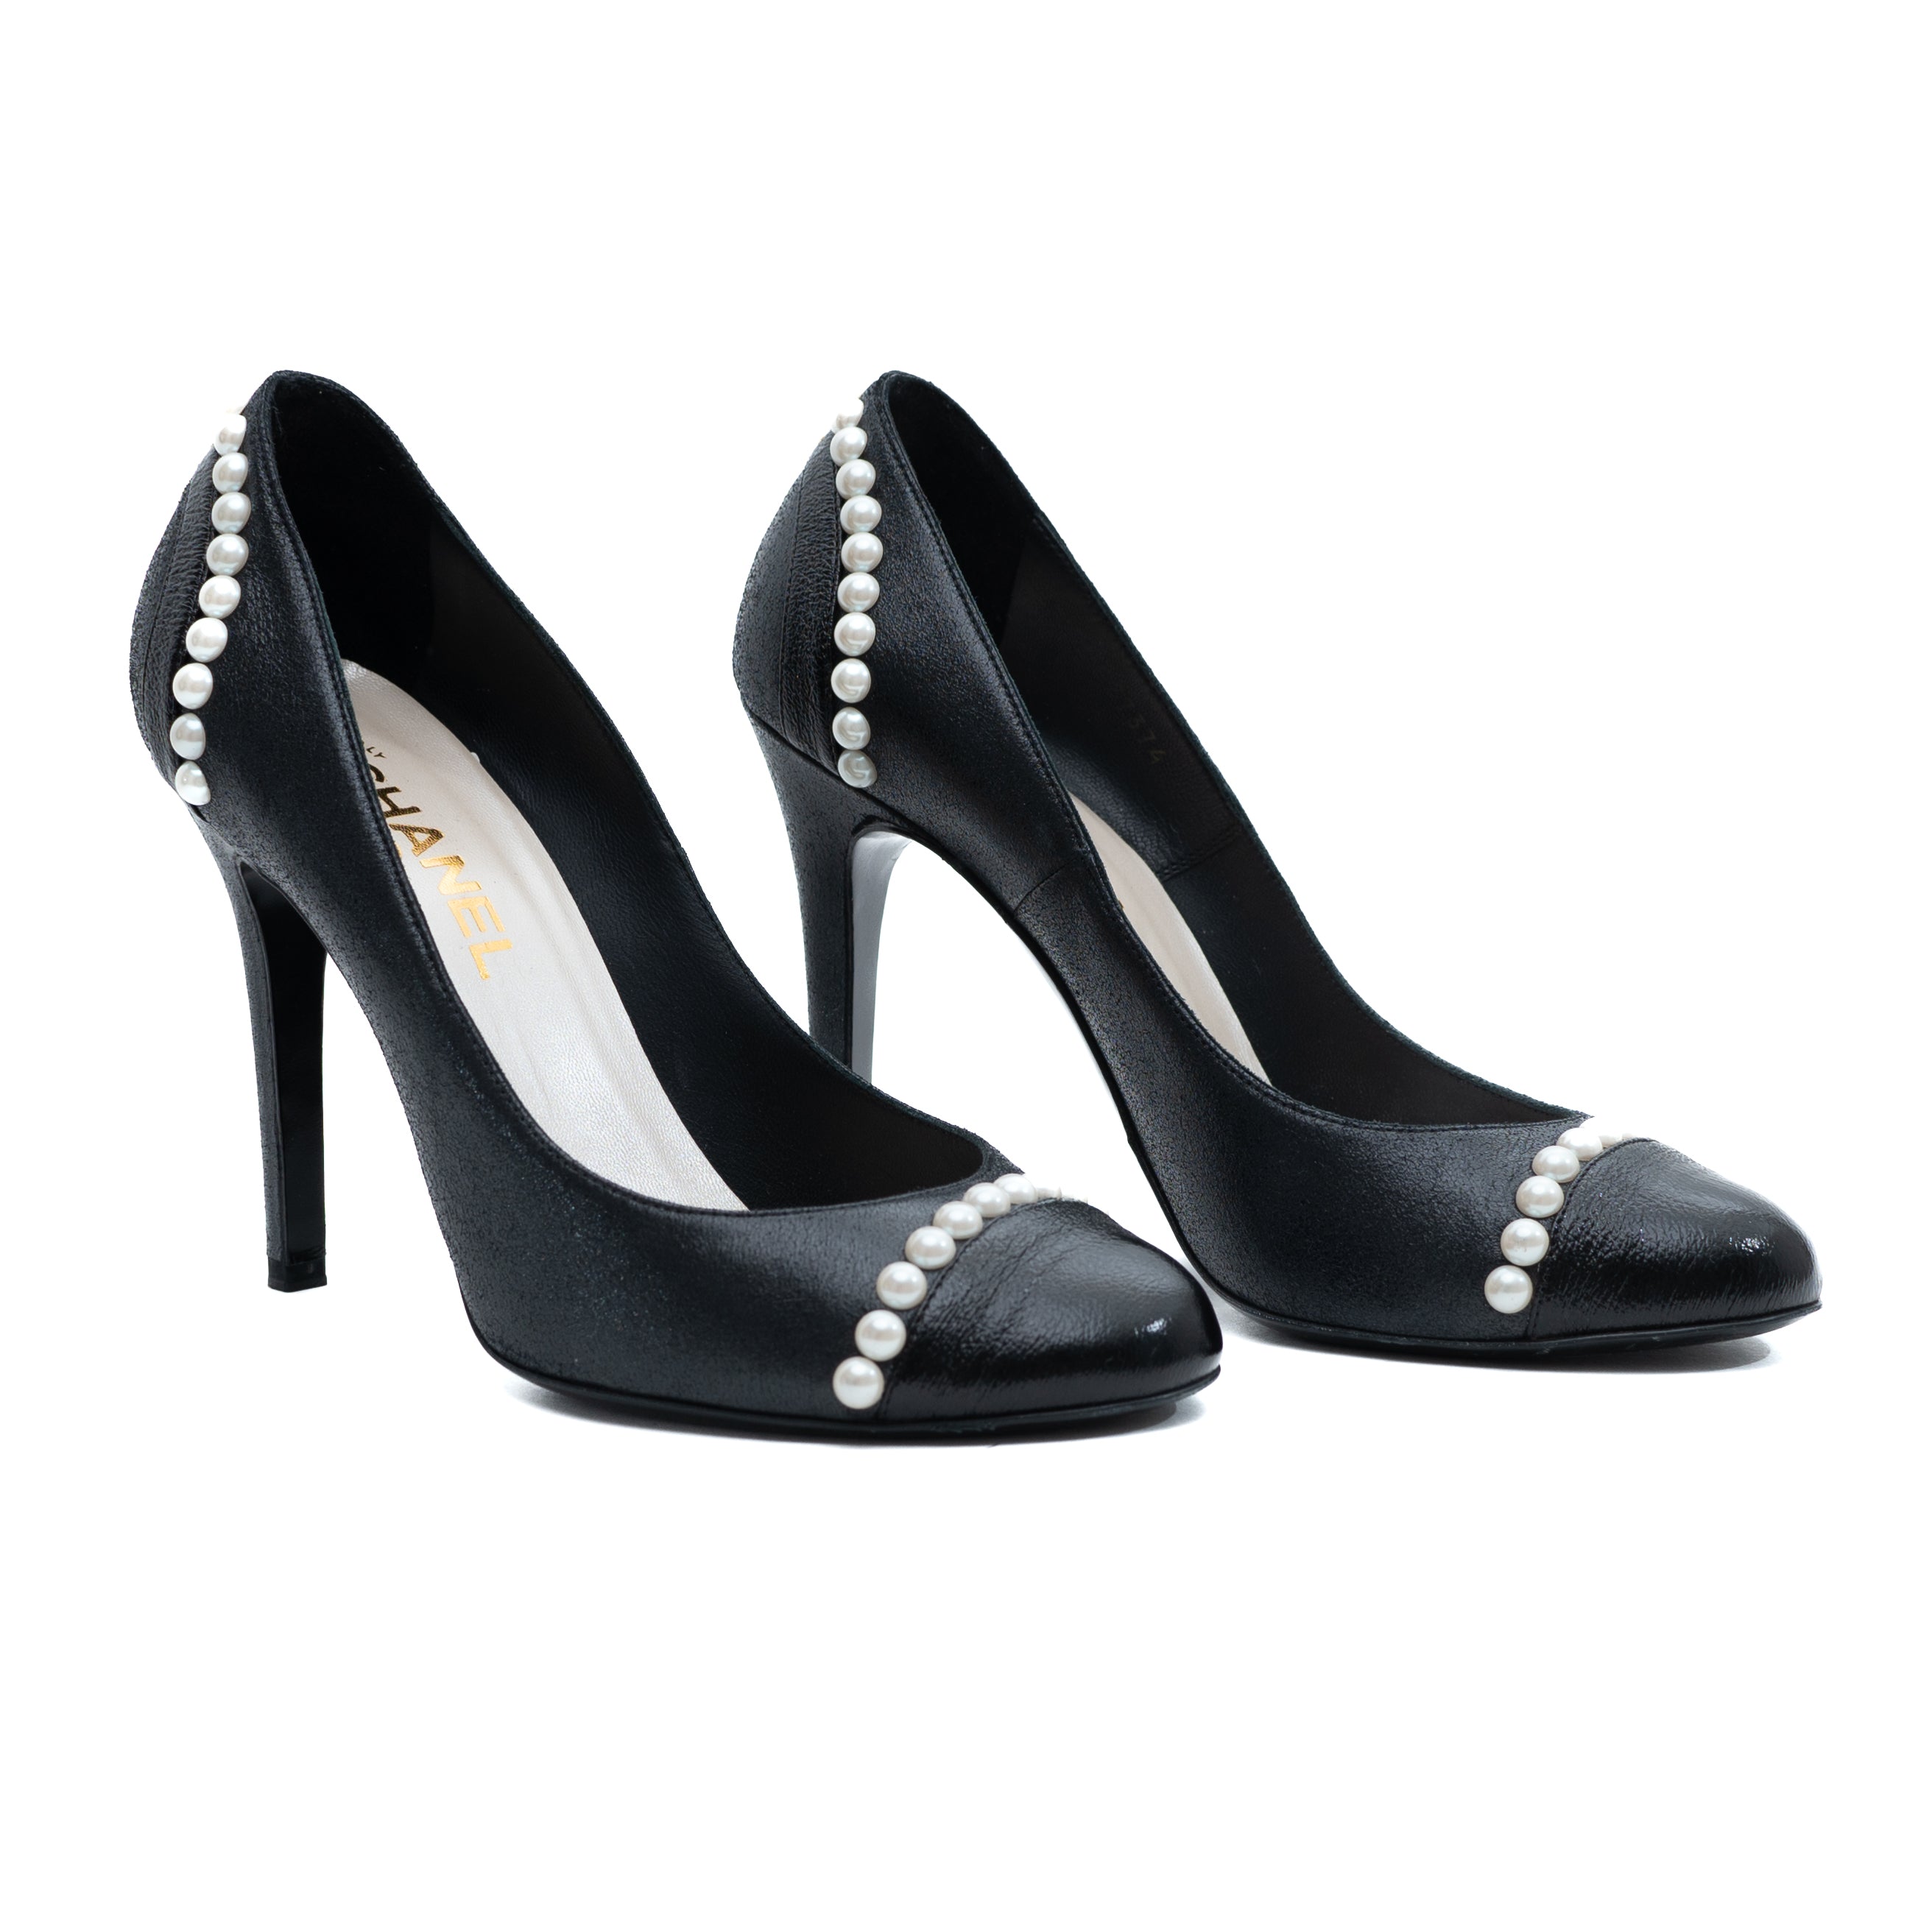 CHANEL Pre-Owned Women's Shoes in Pre-Owned